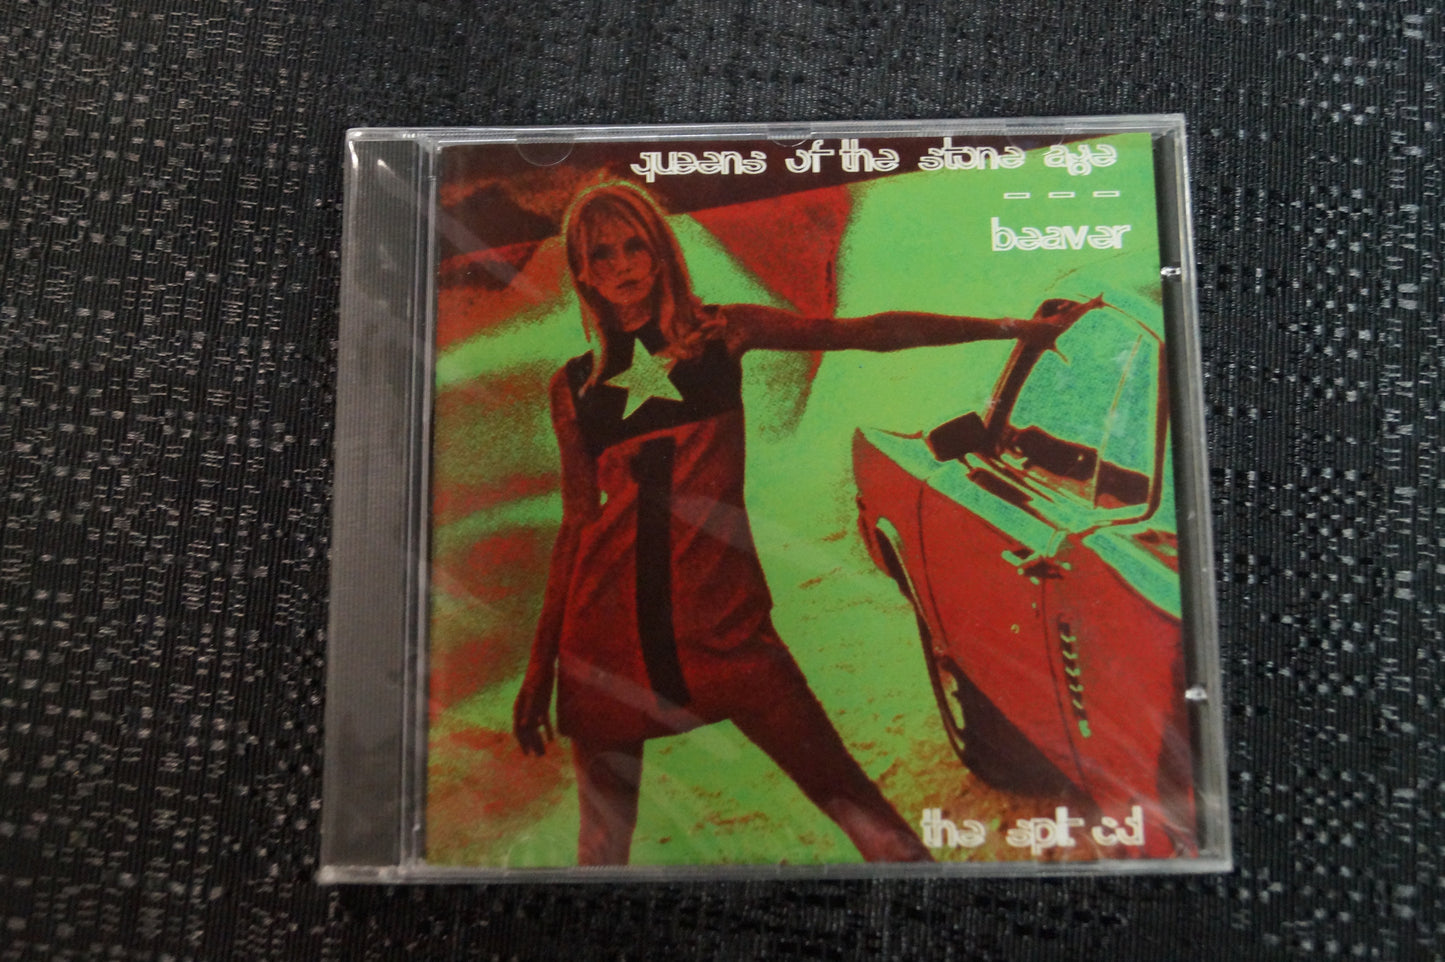 Queens of the Stoneage/Beaver Split Release 1998 CD Art By Kozik